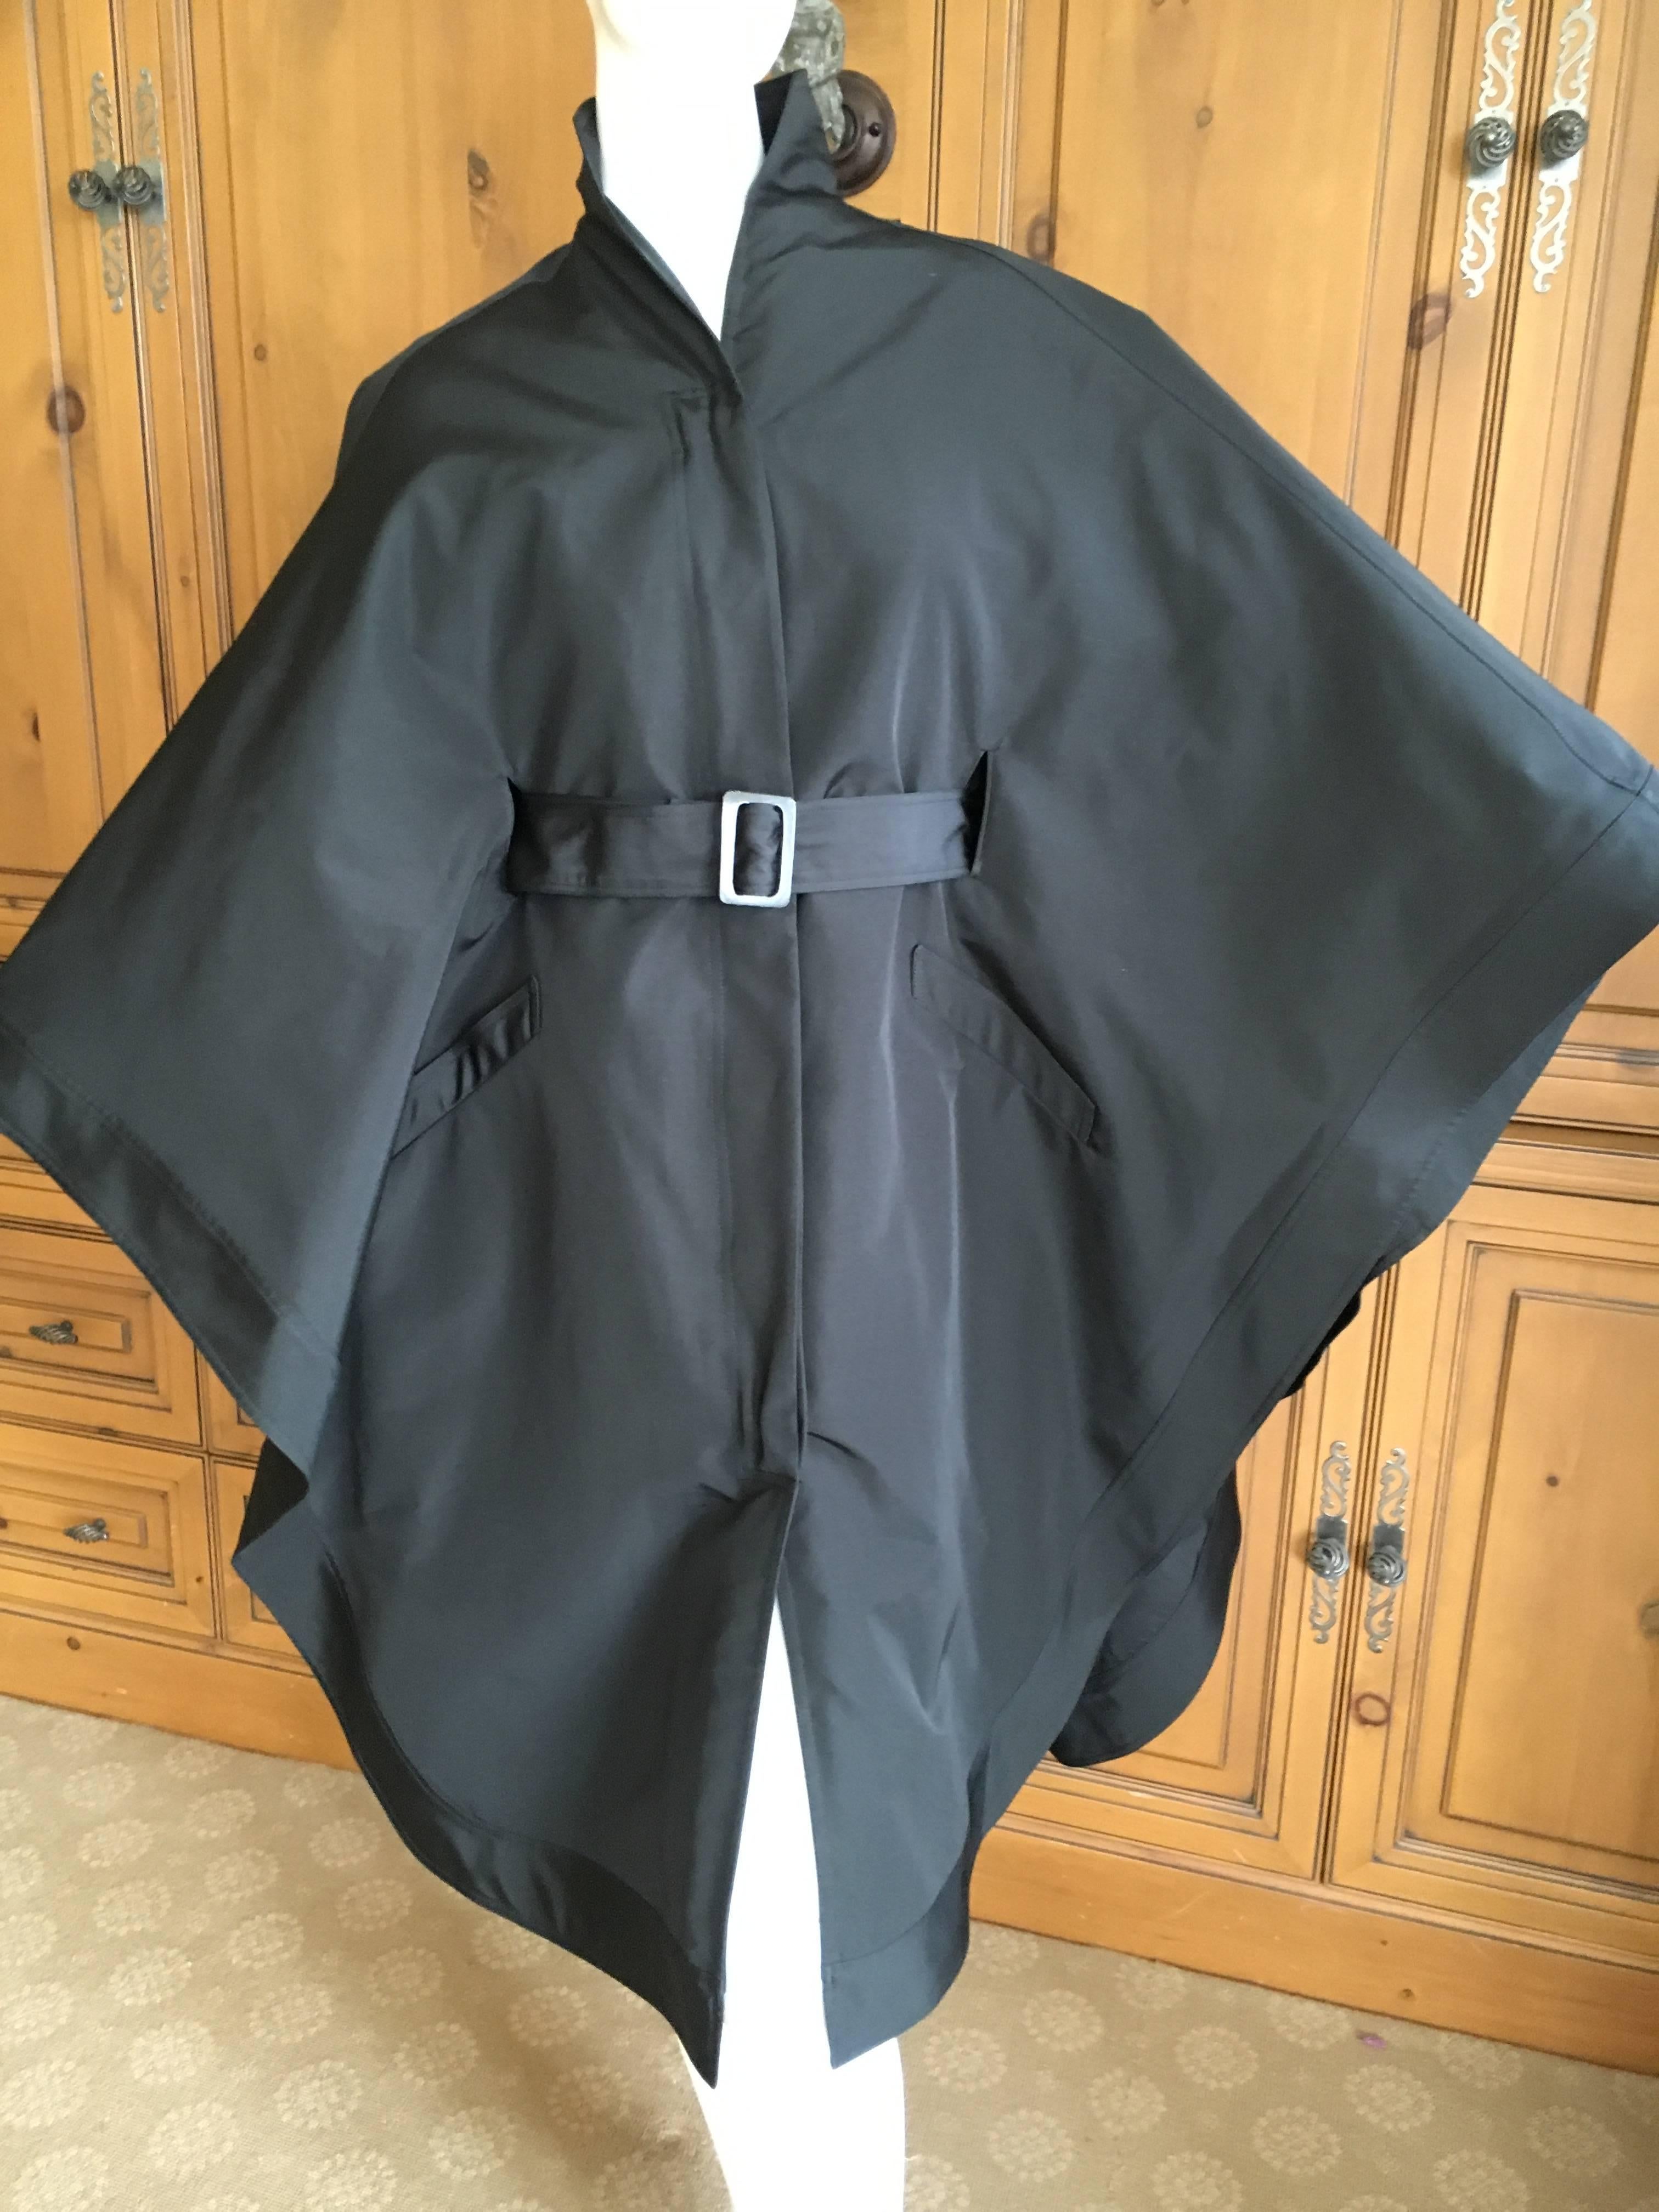 Magnificent cape coat from Chado Ralph Rucci.
This has sleeves underneath the cape, and a matching belt.
I'm not certain what the fabric is, there is no fabric tag, feels like taffeta.
So much prettier than the photos.
Size 8
Bust 38